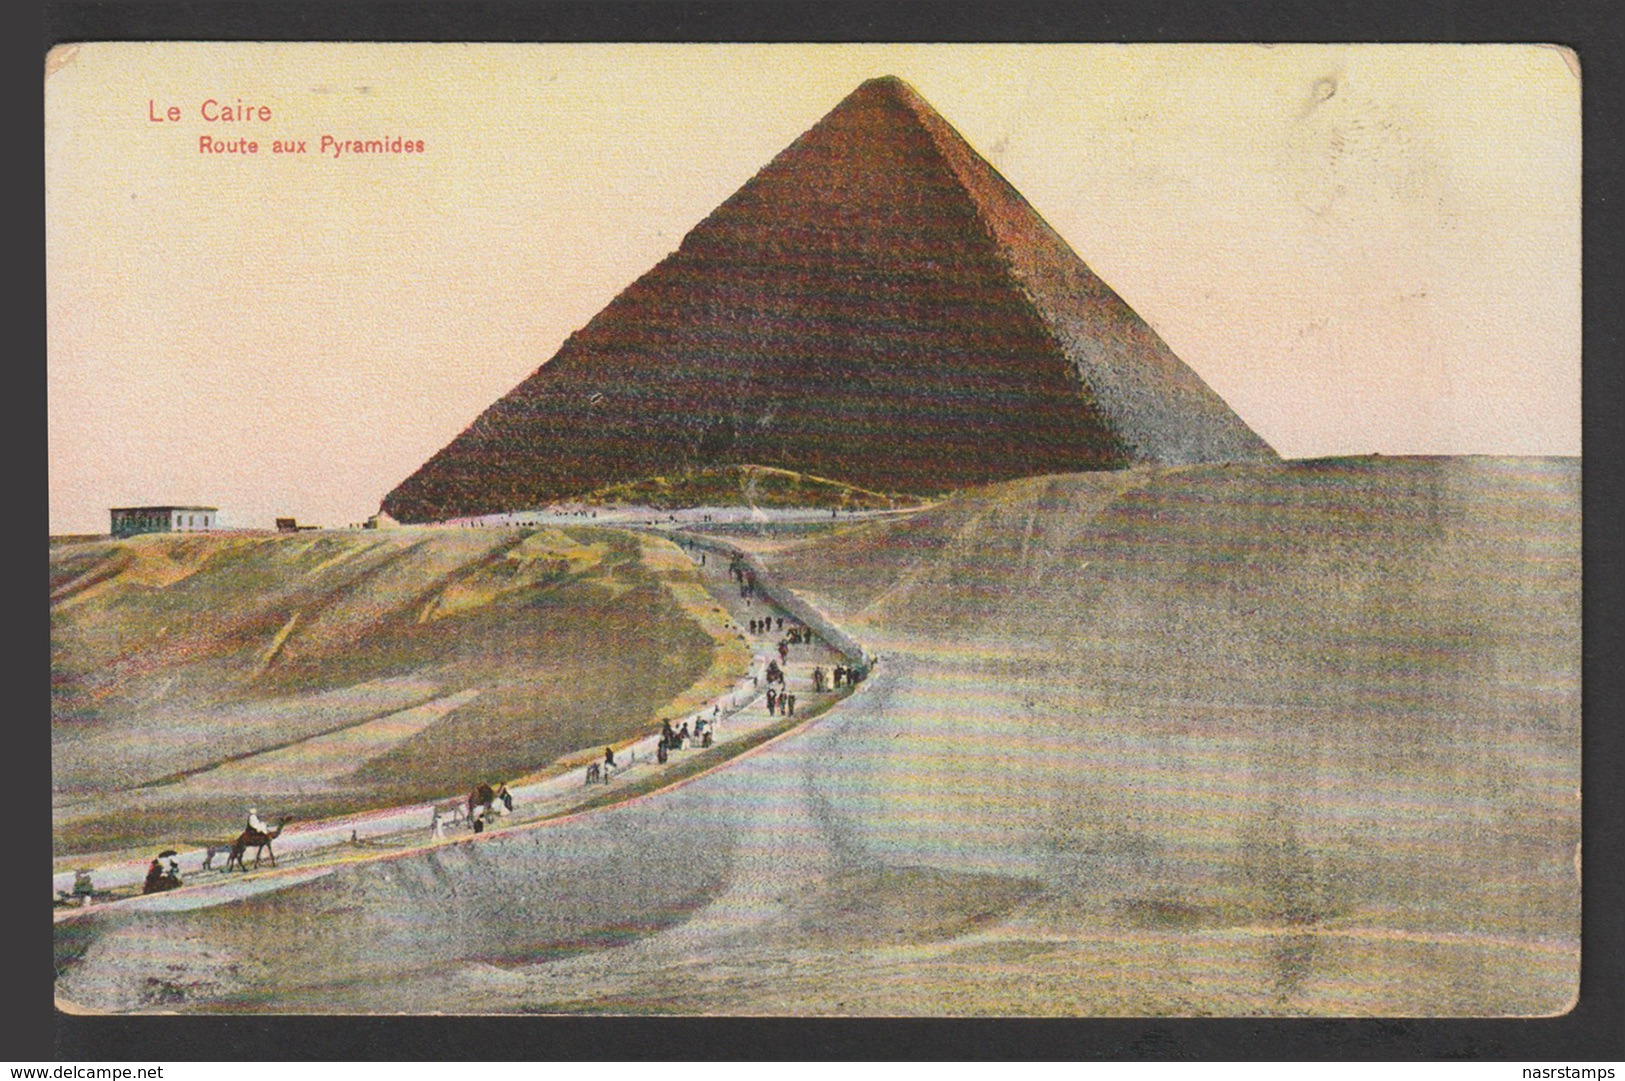 Egypt - Very Rare - Vintage Post Card - Road To The Pyramids - Cairo - 1866-1914 Khedivate Of Egypt